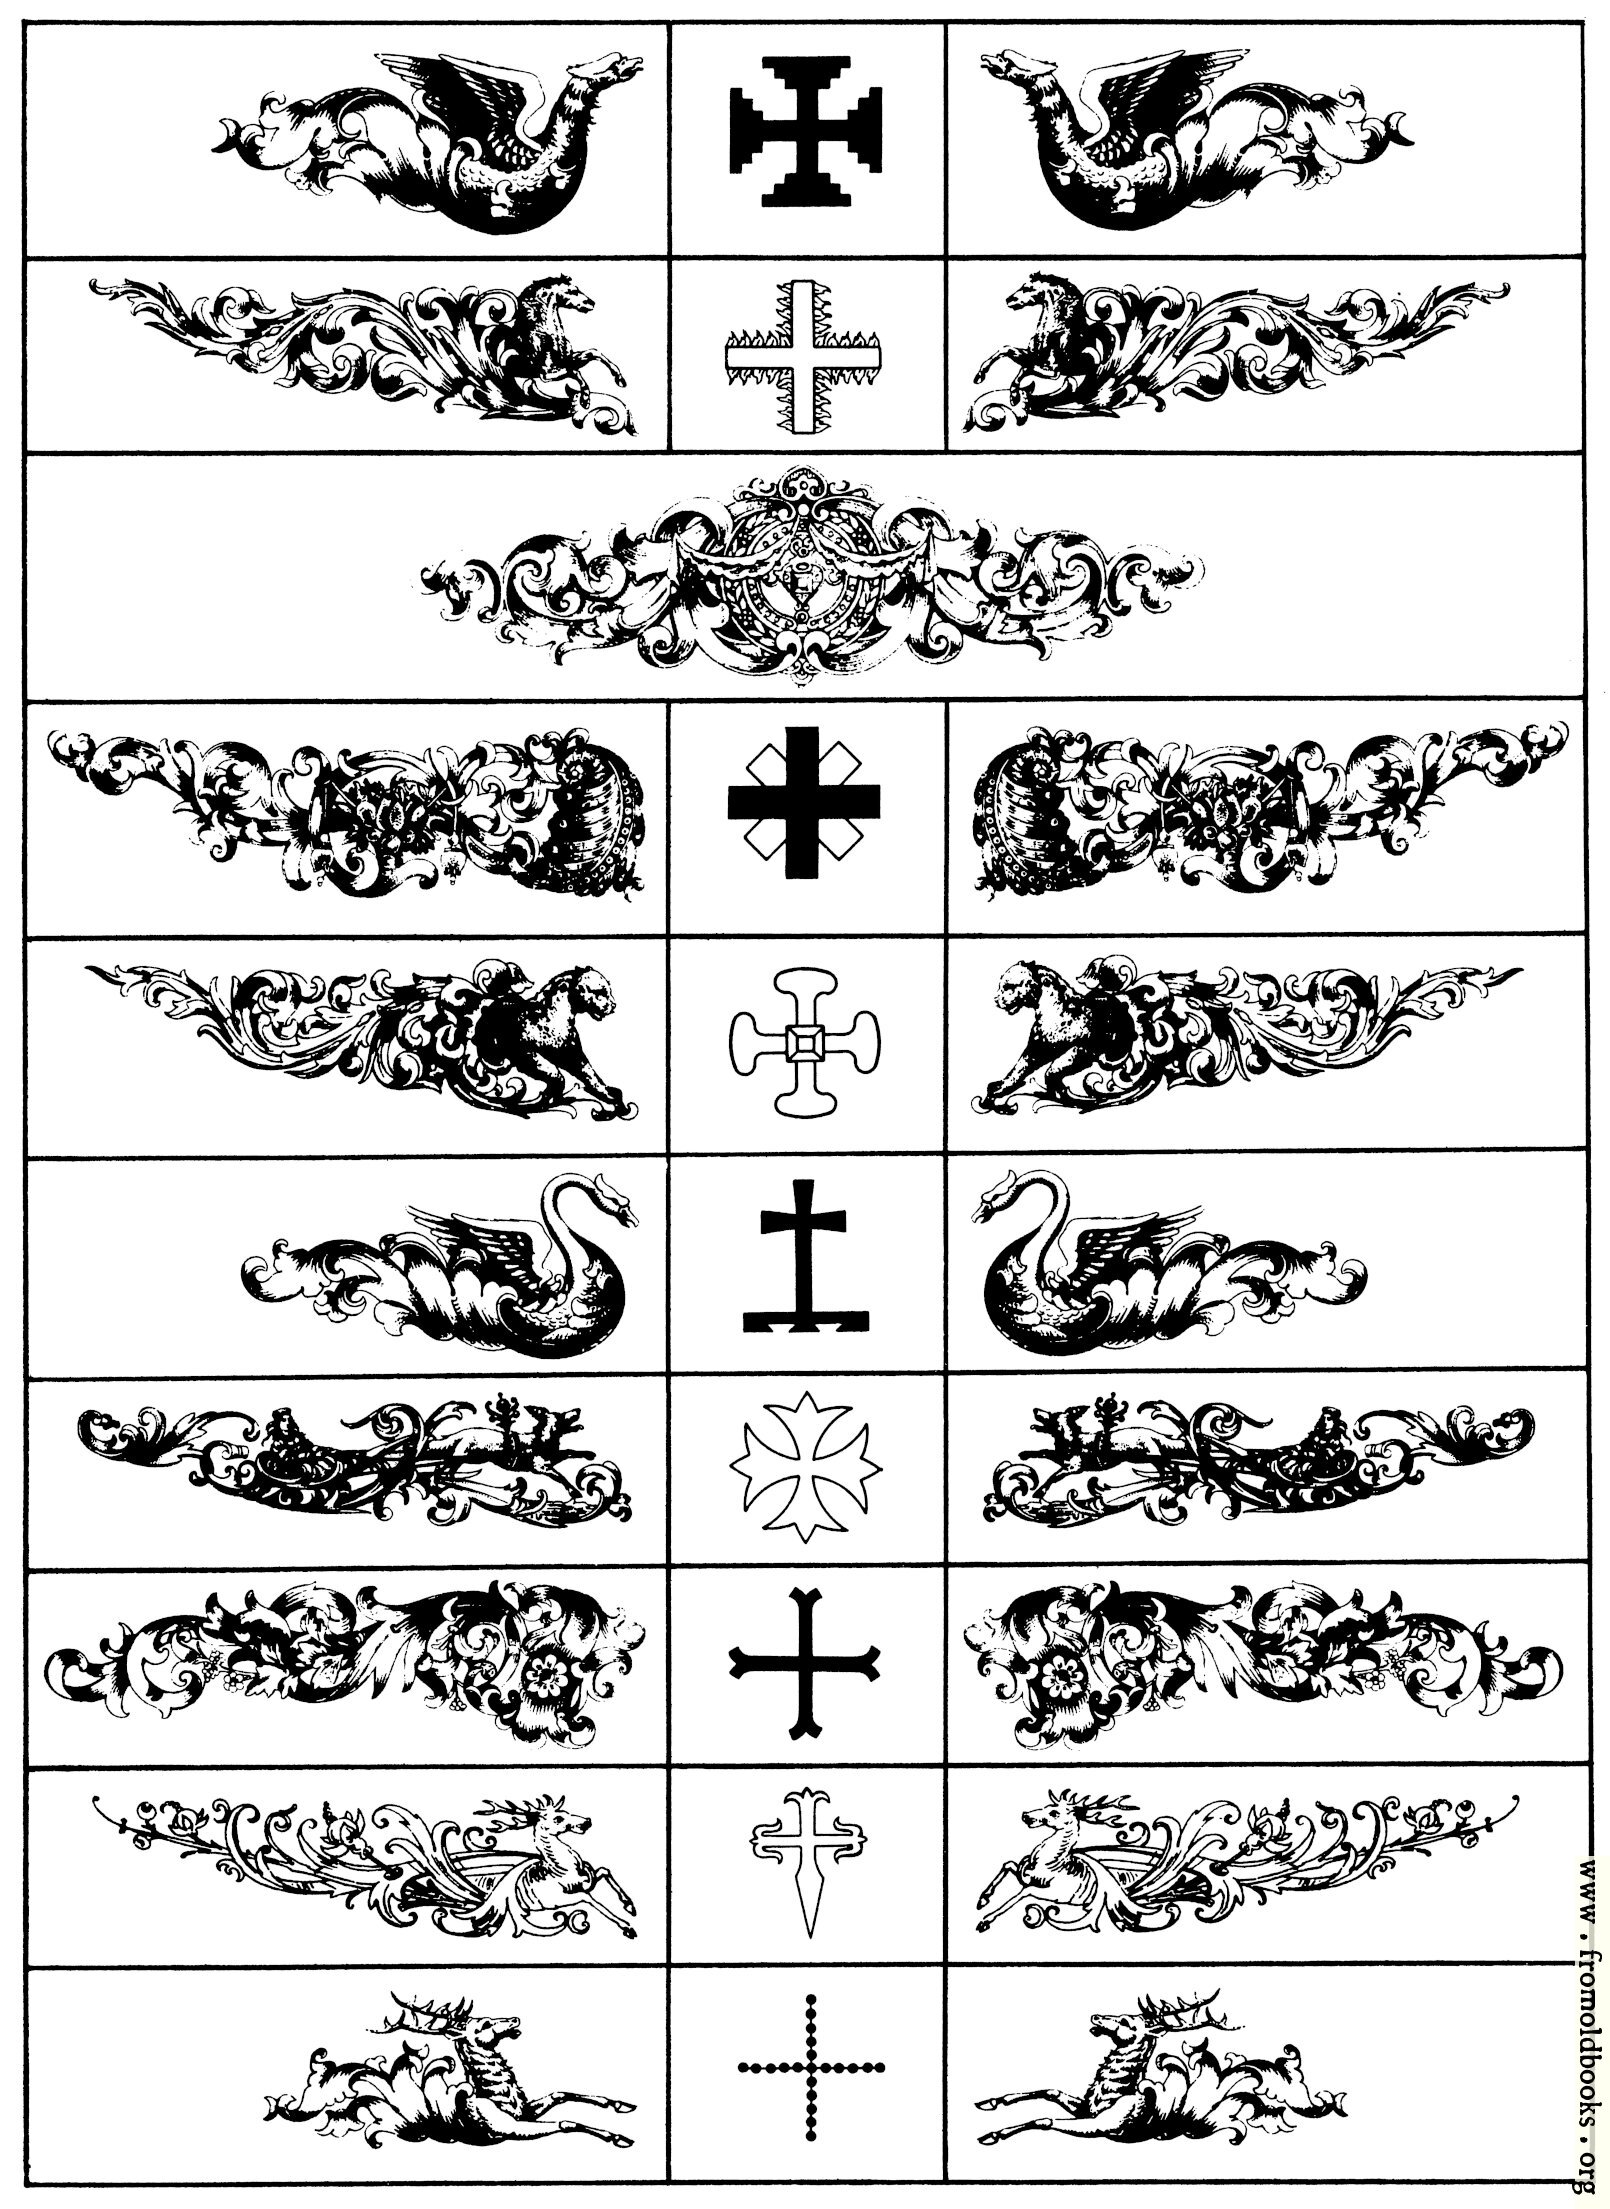 [Picture: Various Chapterheads or Heraldic  Supprting Devices]